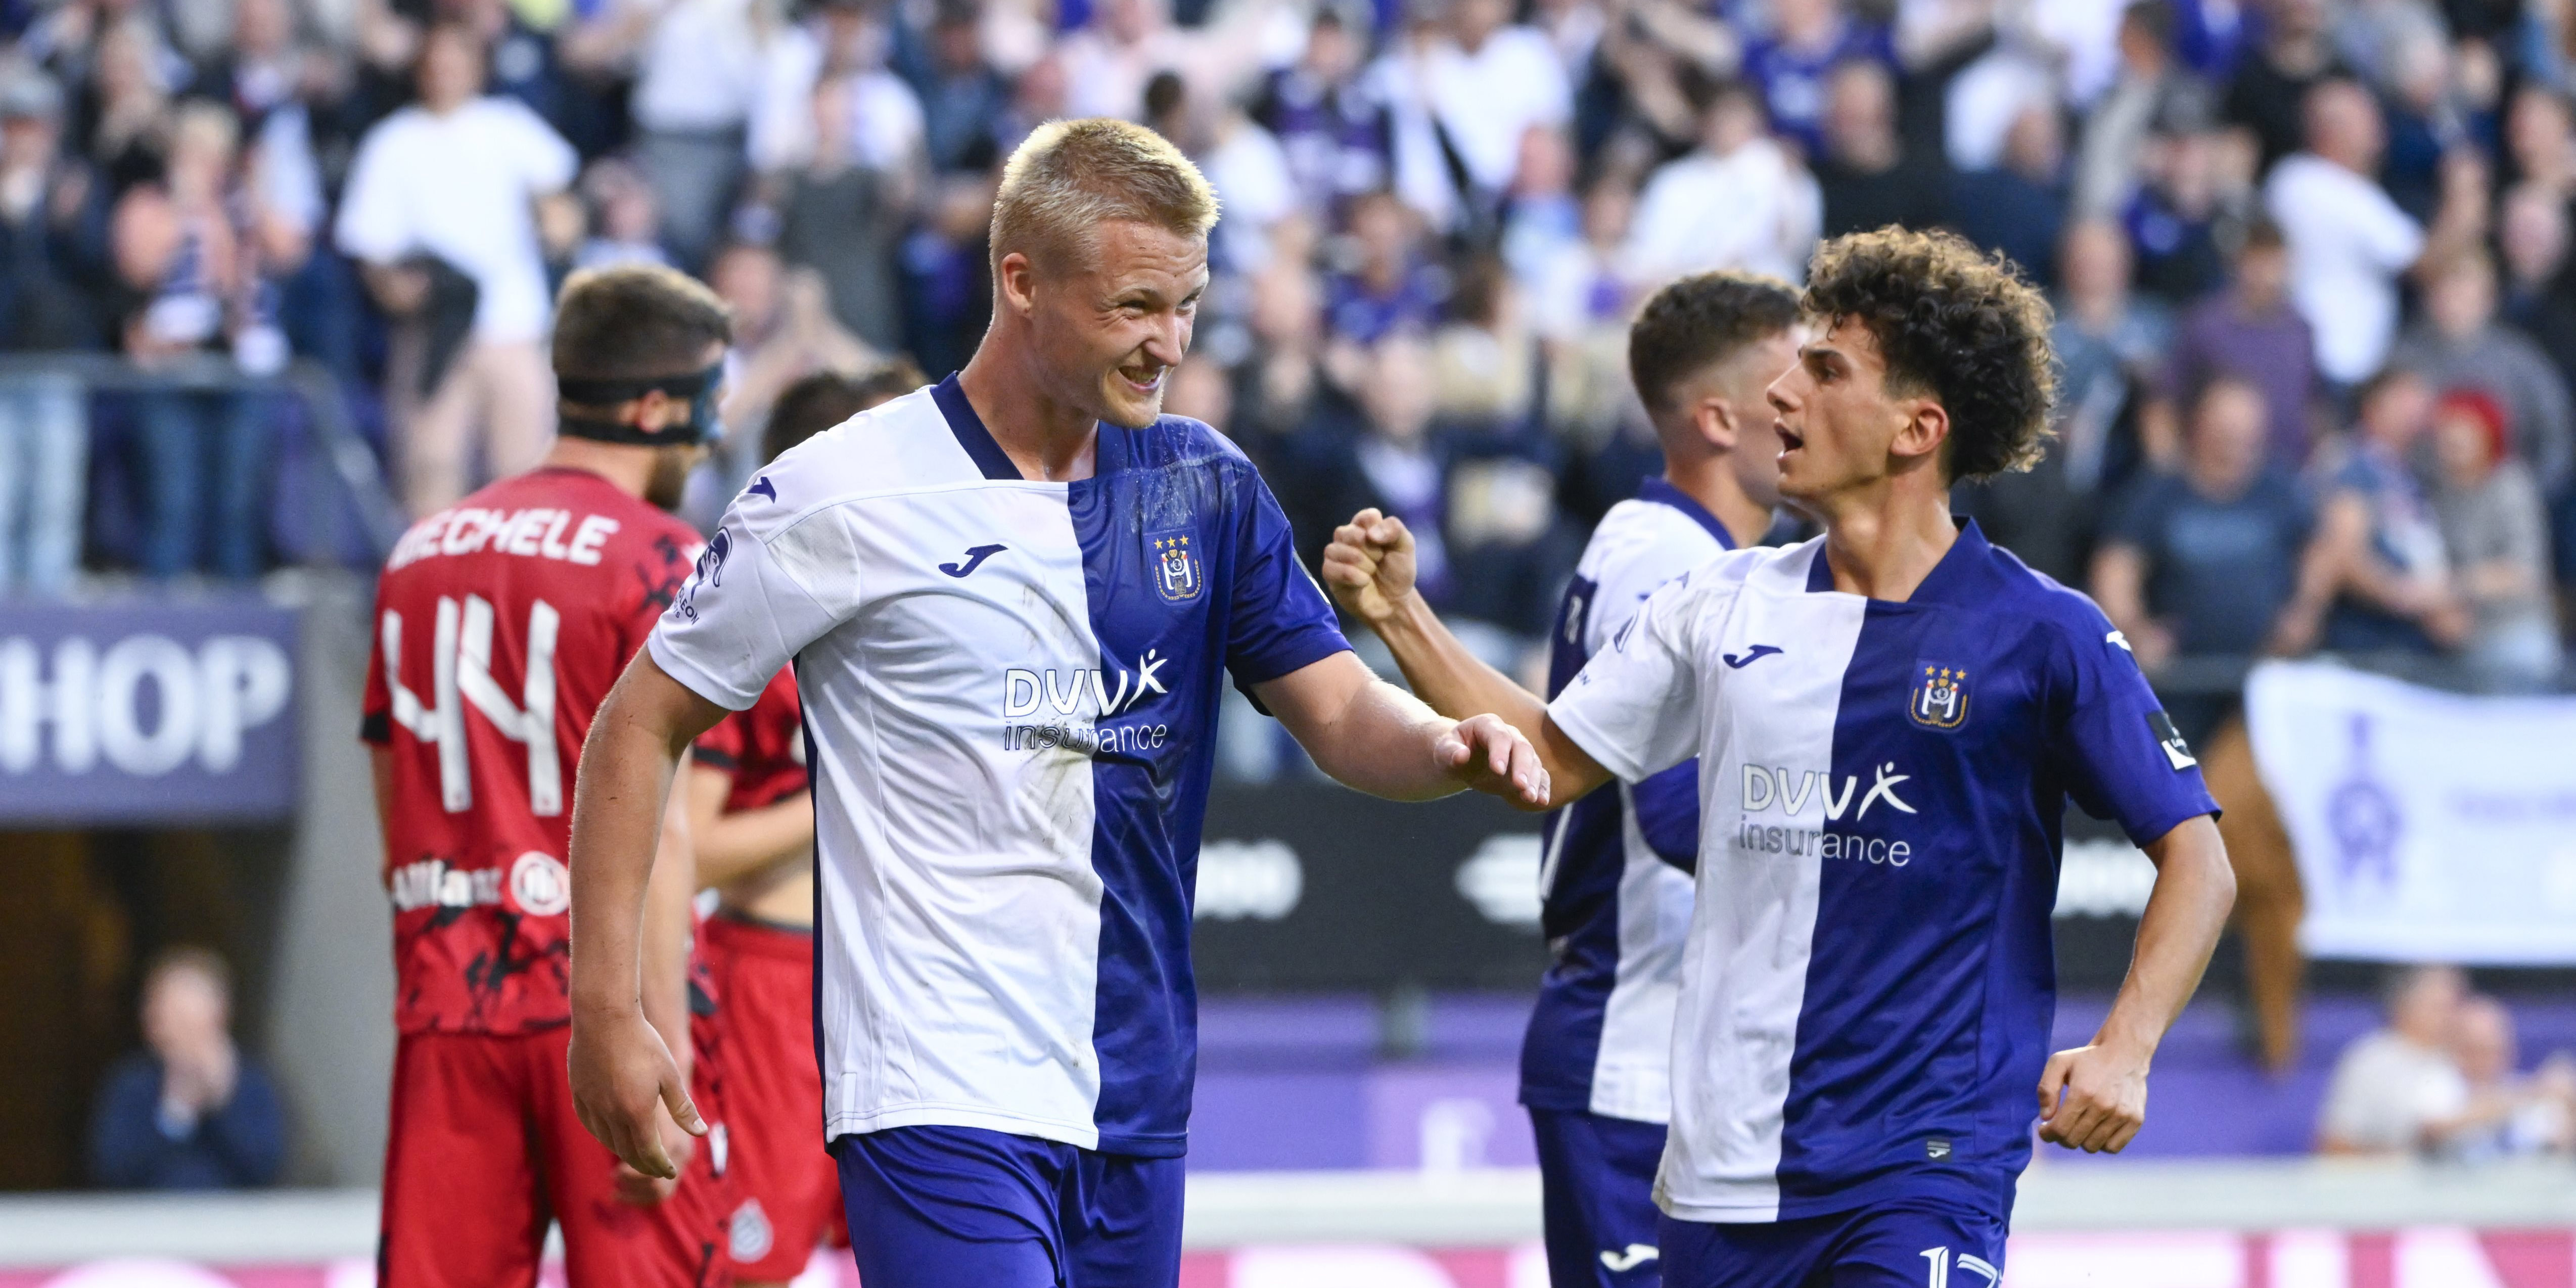 Club Brugge vs Anderlecht: Live Score, Stream and H2H results 5/7/1961.  Preview match Club Brugge vs Anderlecht, team, start time.